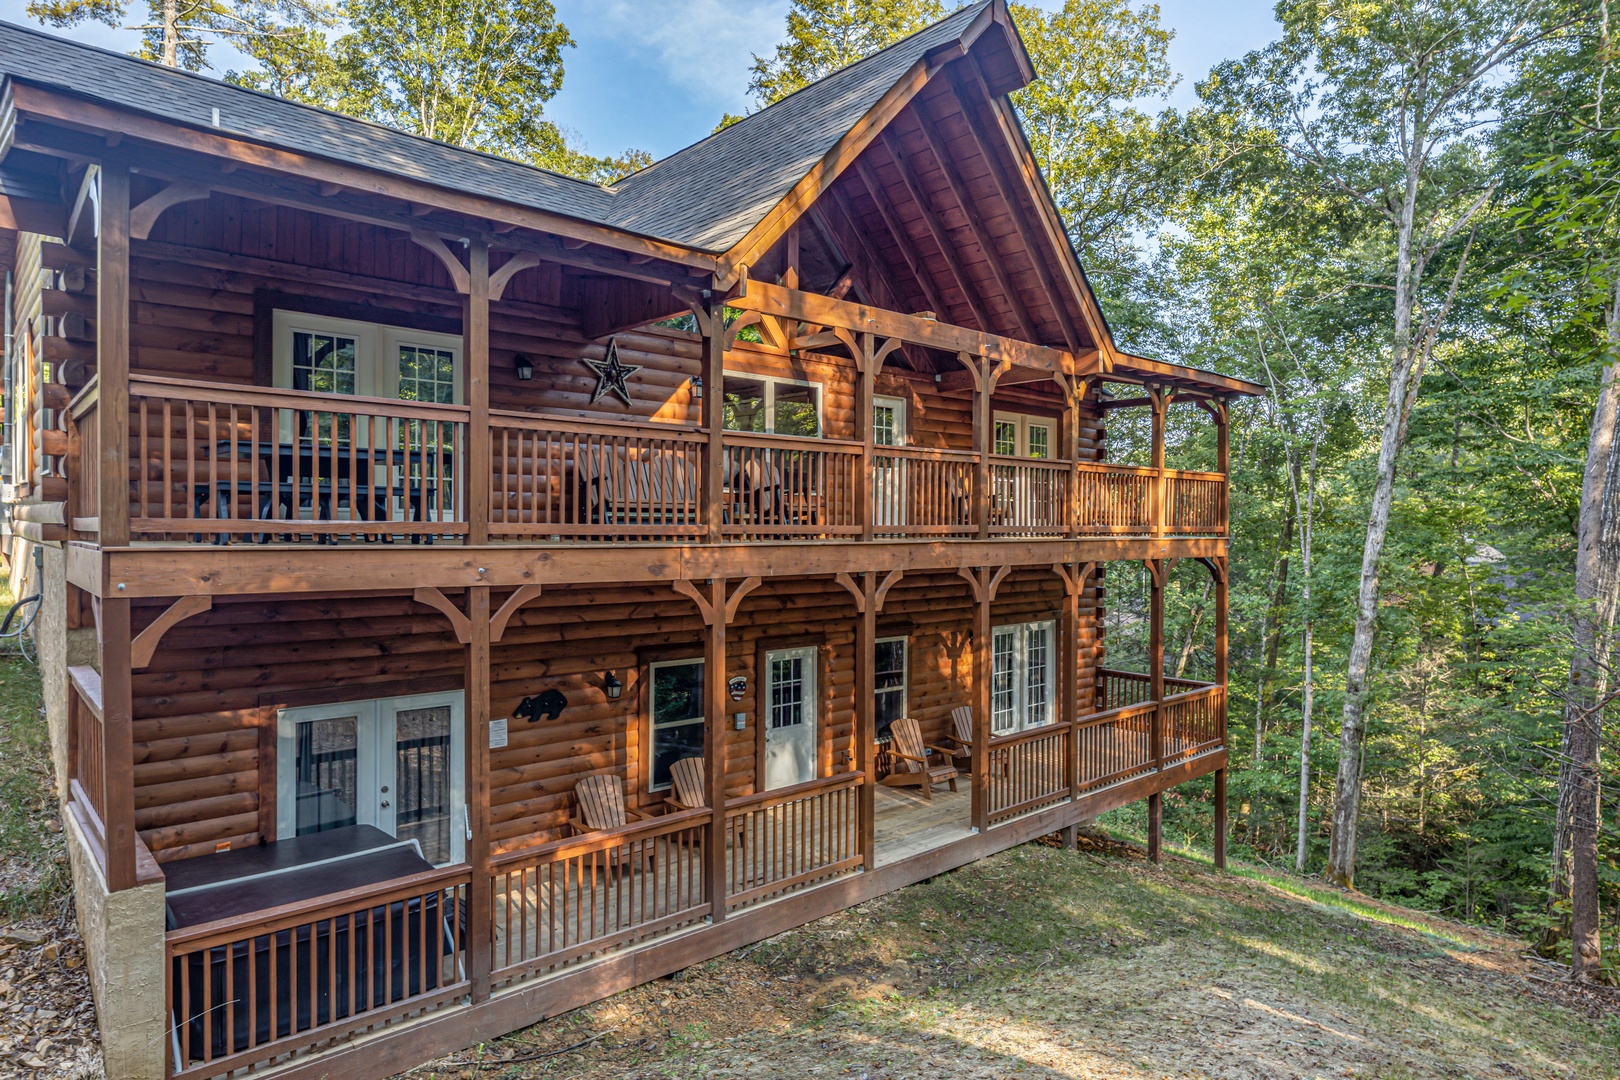 Back exterior view at Gar Bear's Hideaway, a Pigeon Forge cabin rental